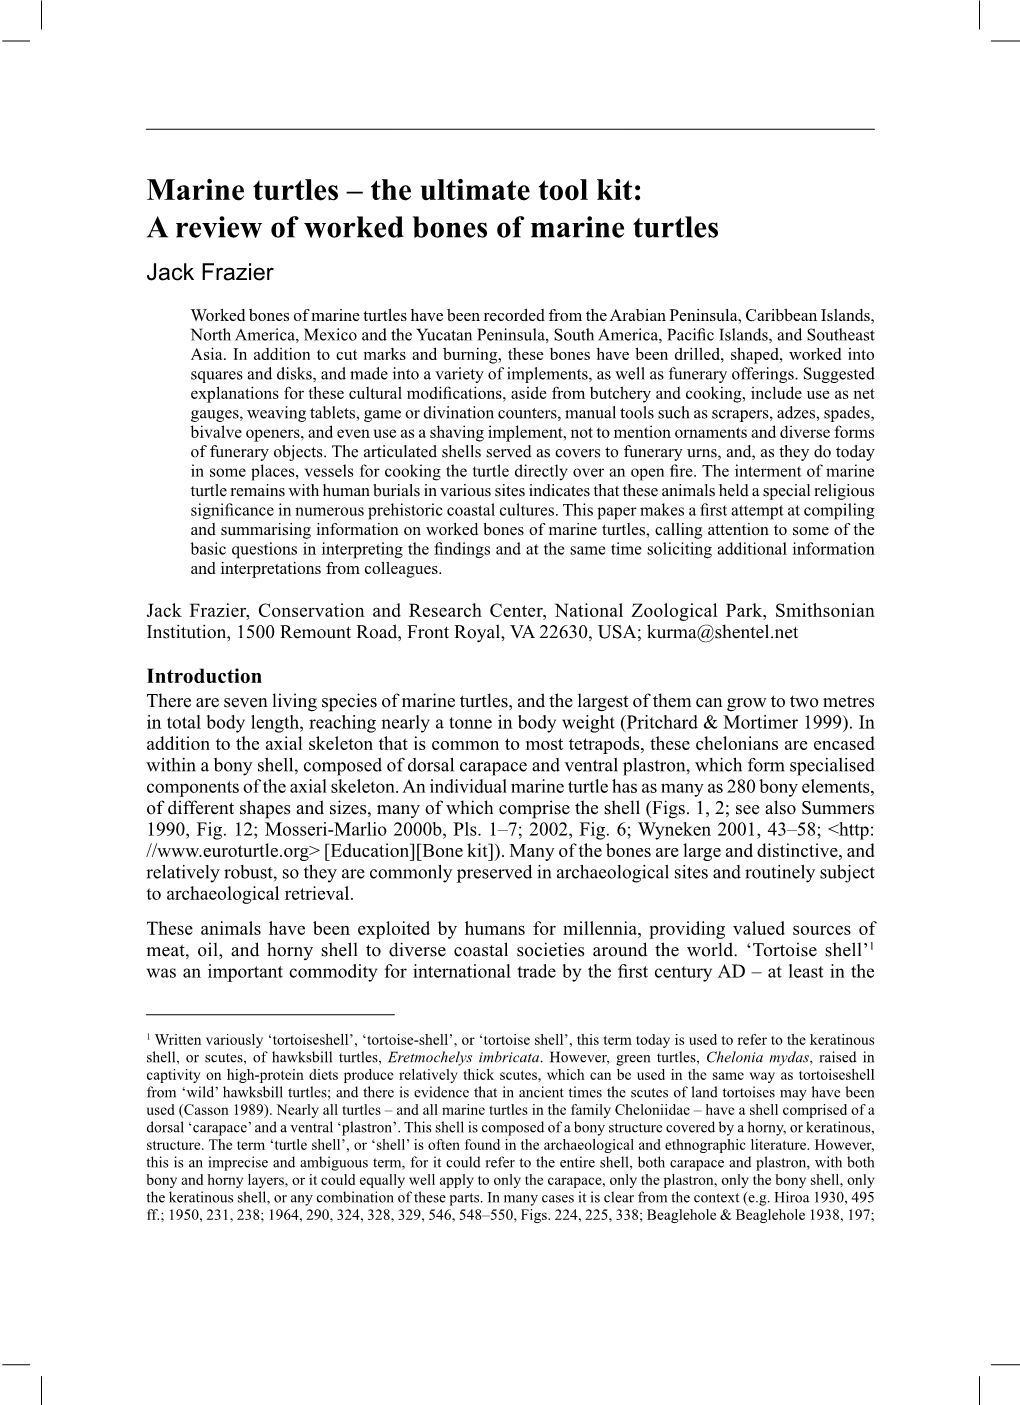 Marine Turtles – the Ultimate Tool Kit: a Review of Worked Bones of Marine Turtles Jack Frazier